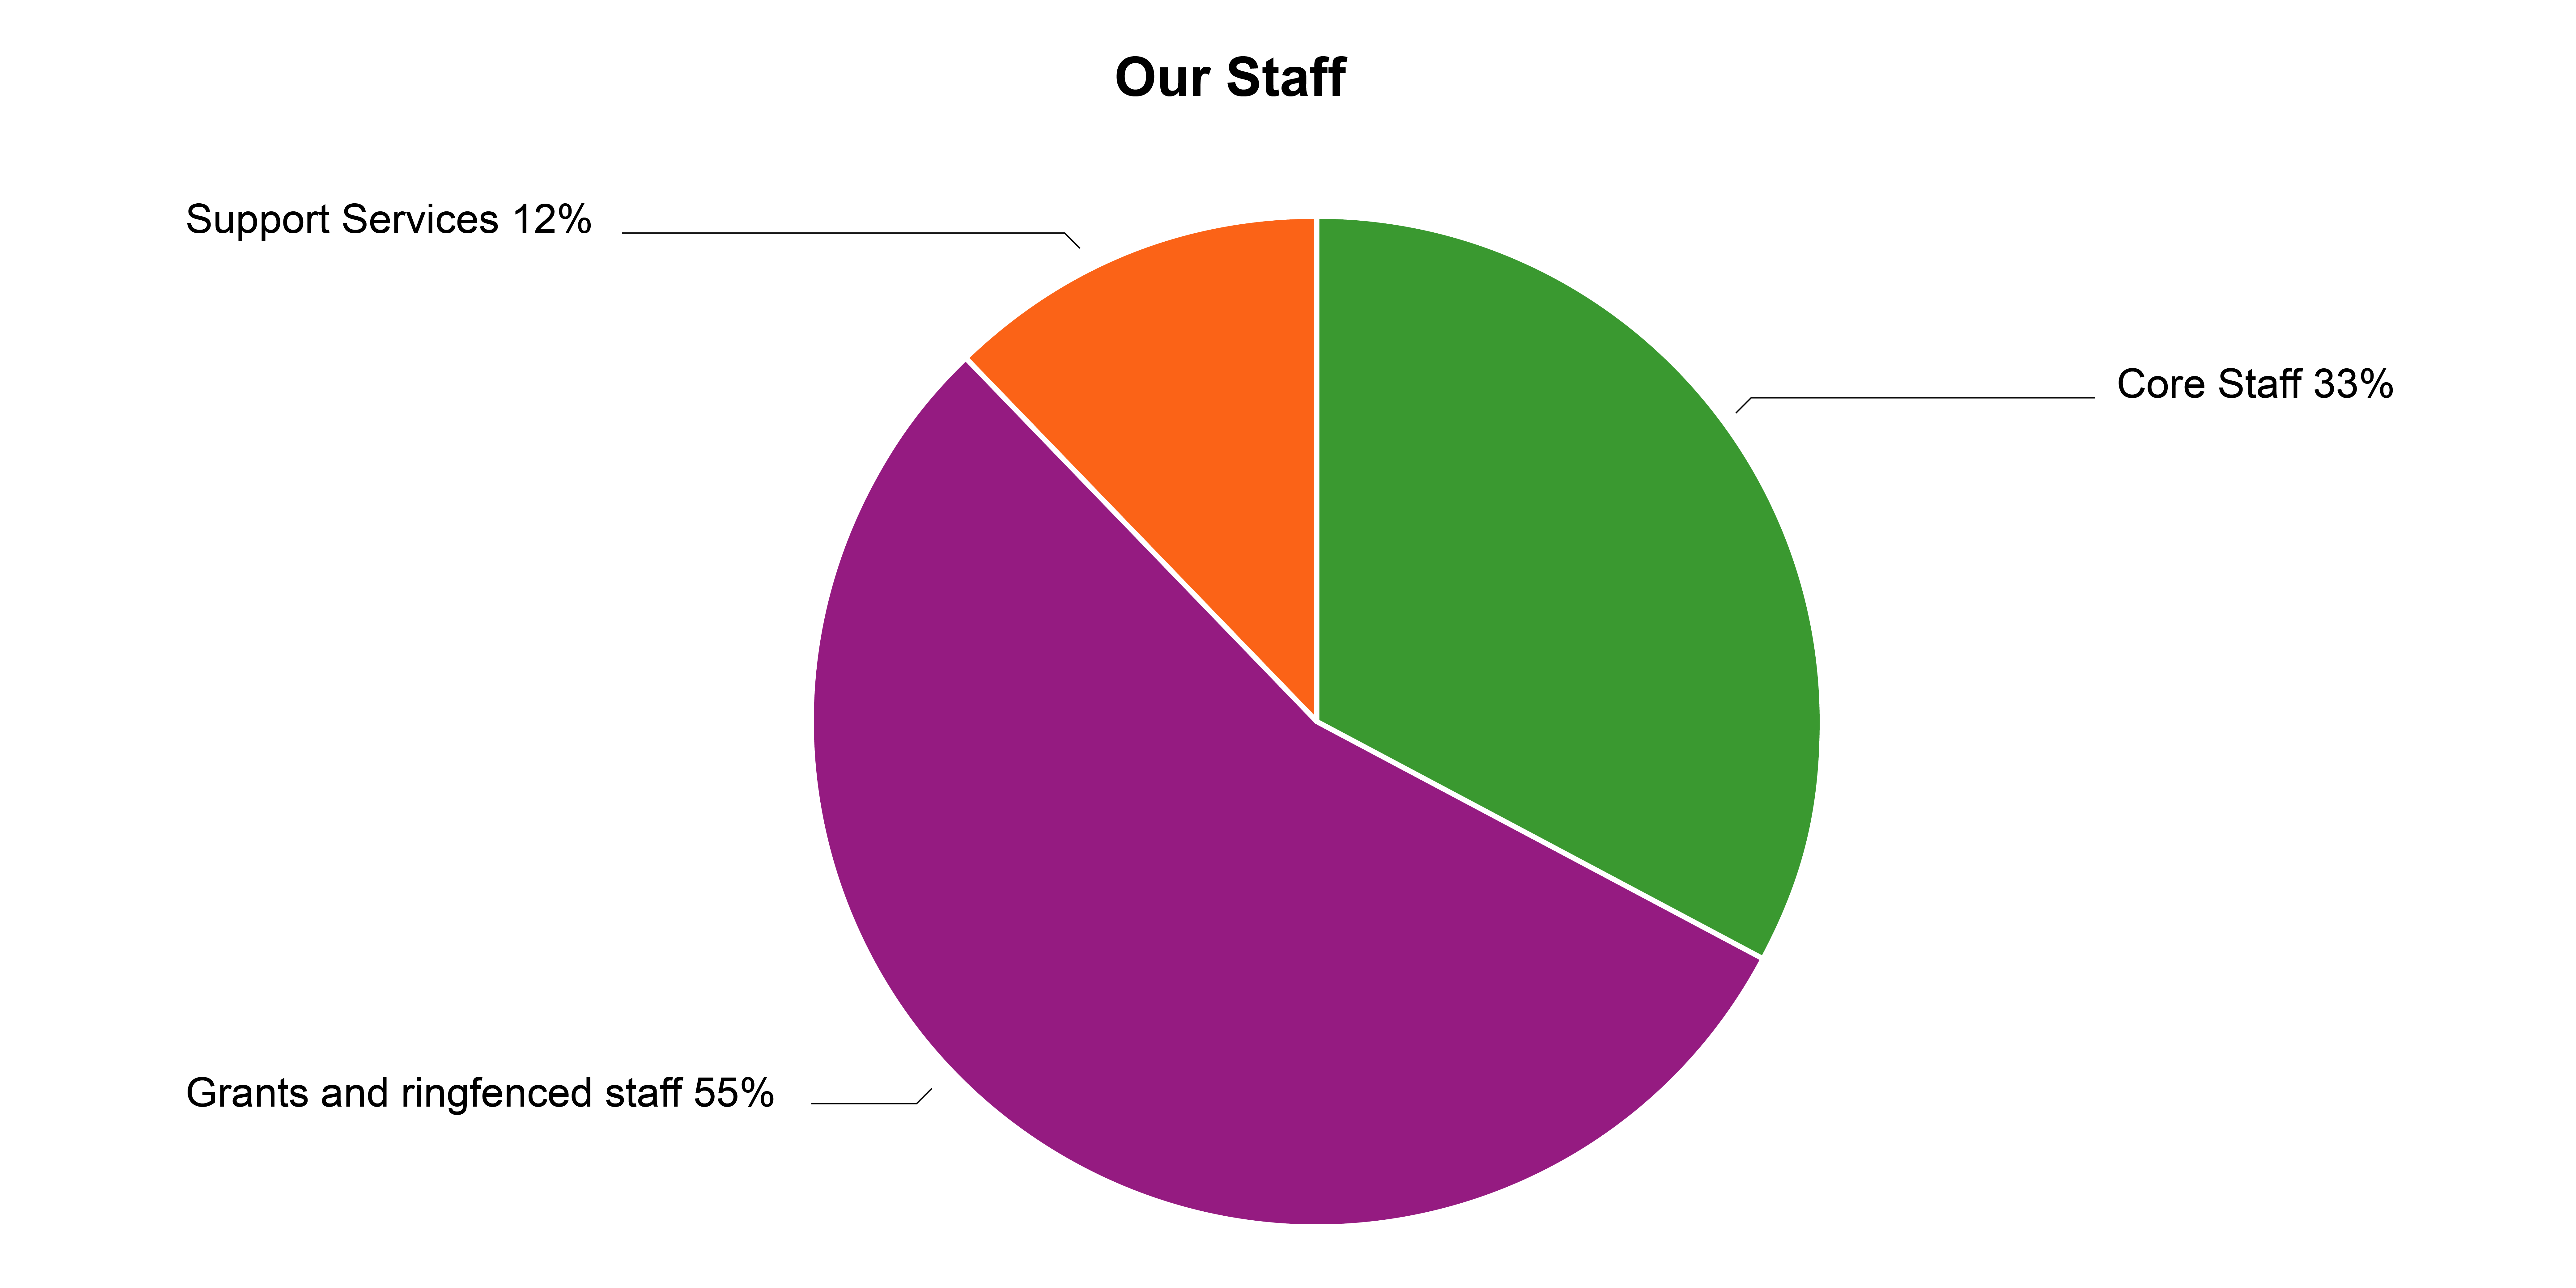 A pie chart showing the LGA's staffing